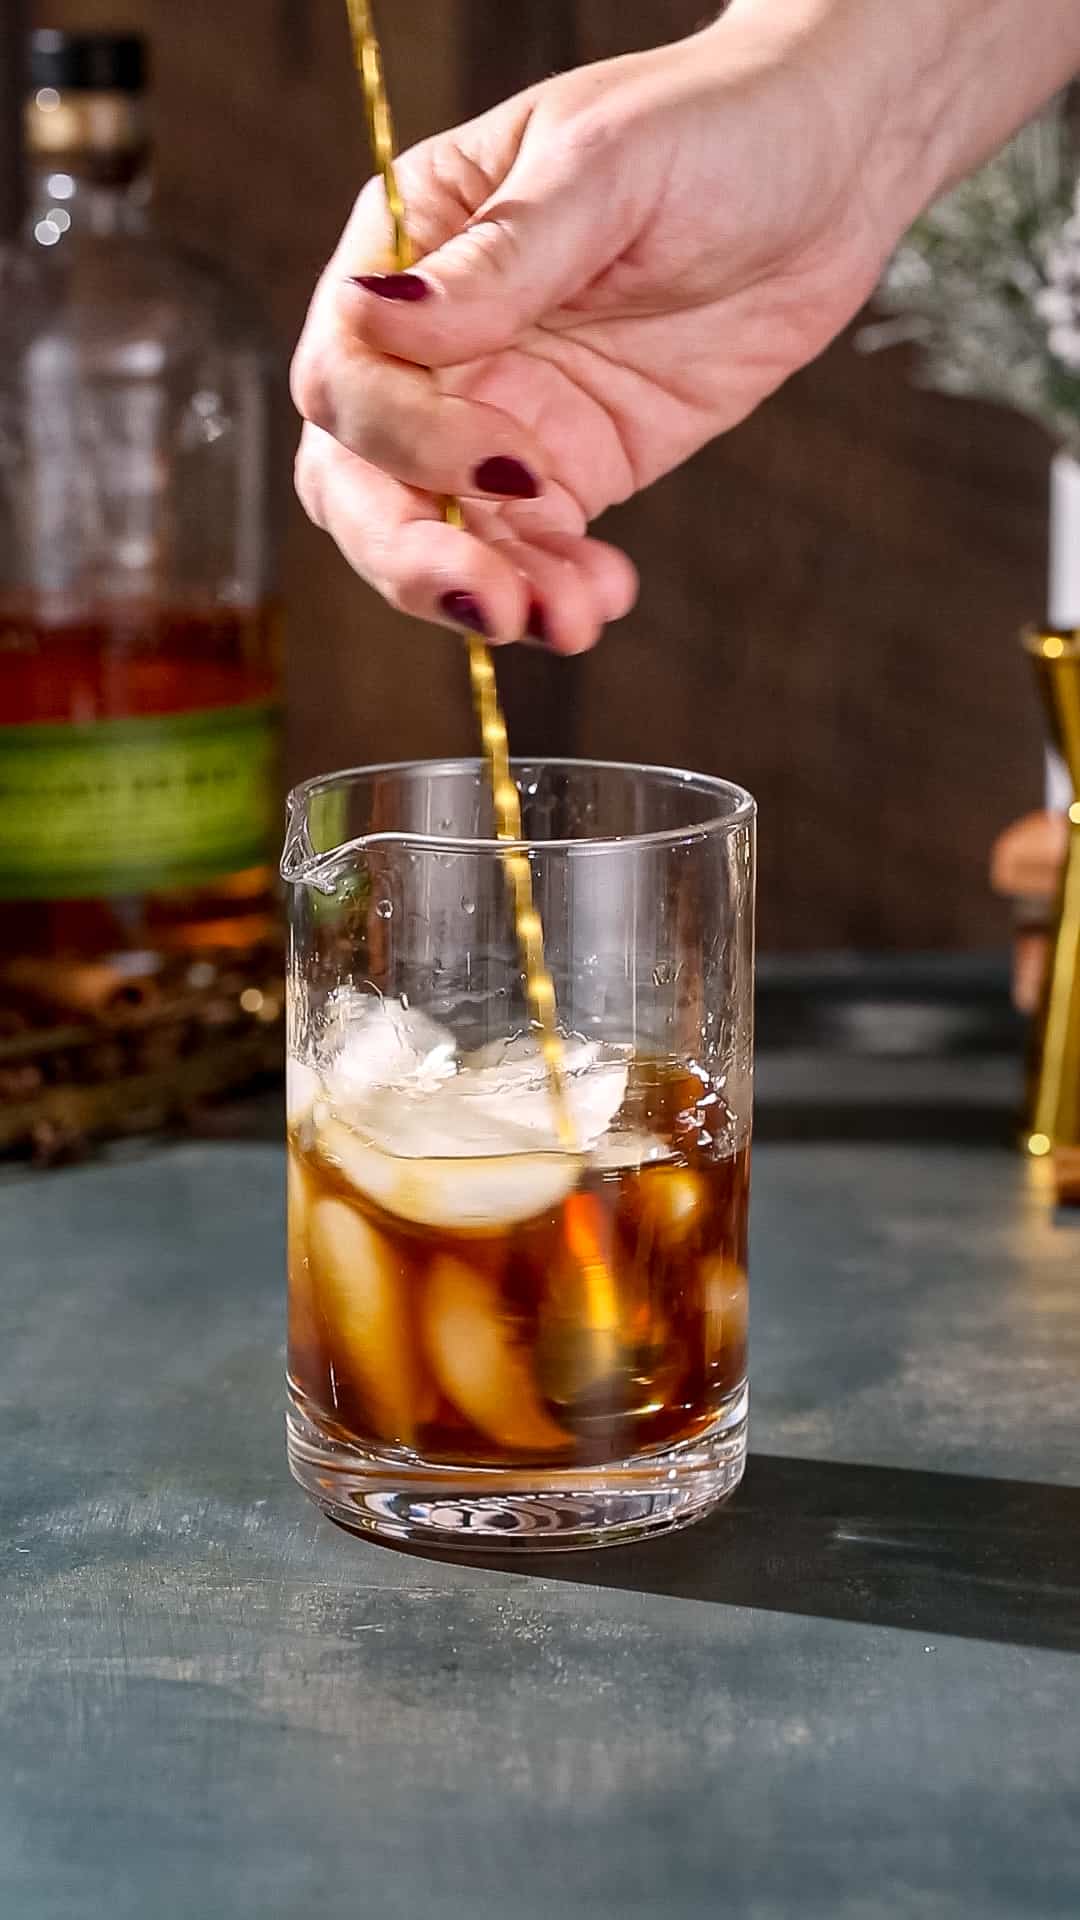 Hand using a gold bar spoon to stir a brown drink with ice in it.